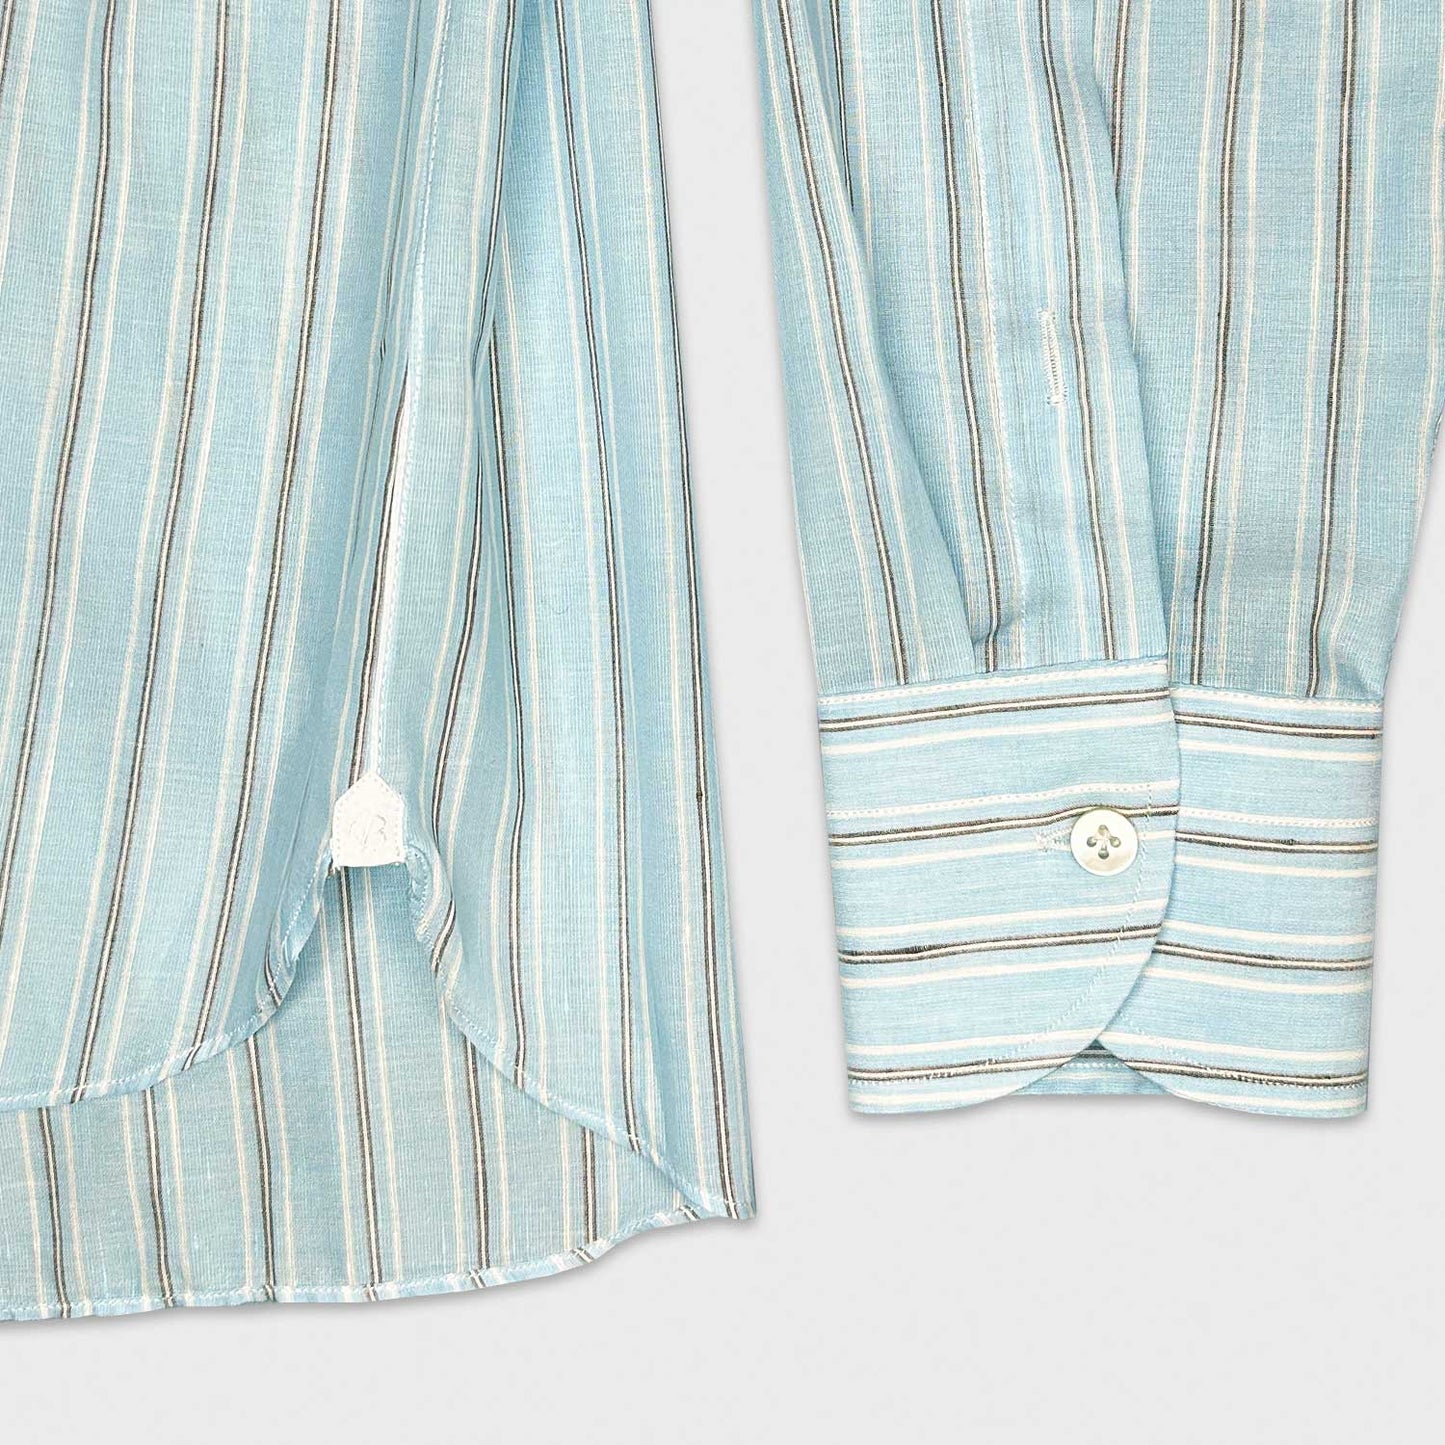 Load image into Gallery viewer, Neutral color edgewater striped shirt men, handmade Borriello Napoli shirt exclusive for Wools Boutique Uomo, light muslin cotton, easy to match with many classic ties and jackets, a refined alternative to the white shirt.
